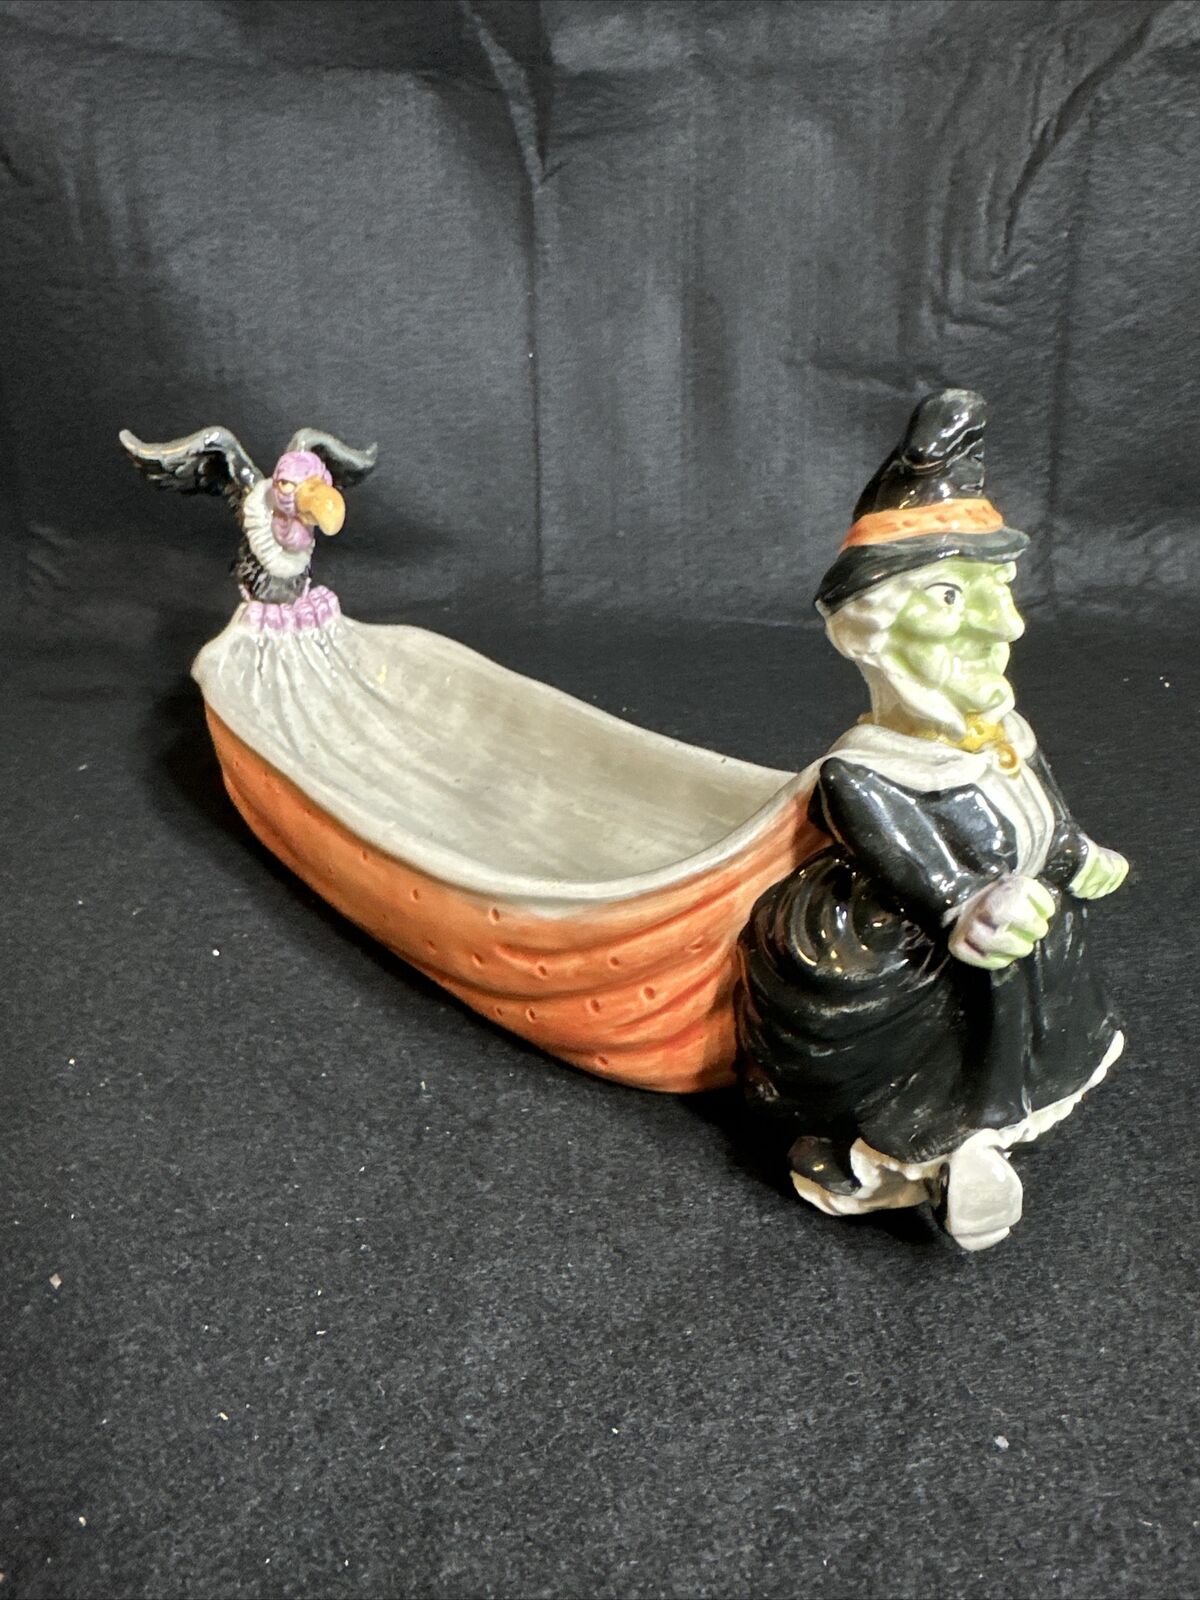 VERY RARE 1988 Fitz & Floyd Halloween Witch Vulture Candy Nut Bowl Dish 🎃🎃